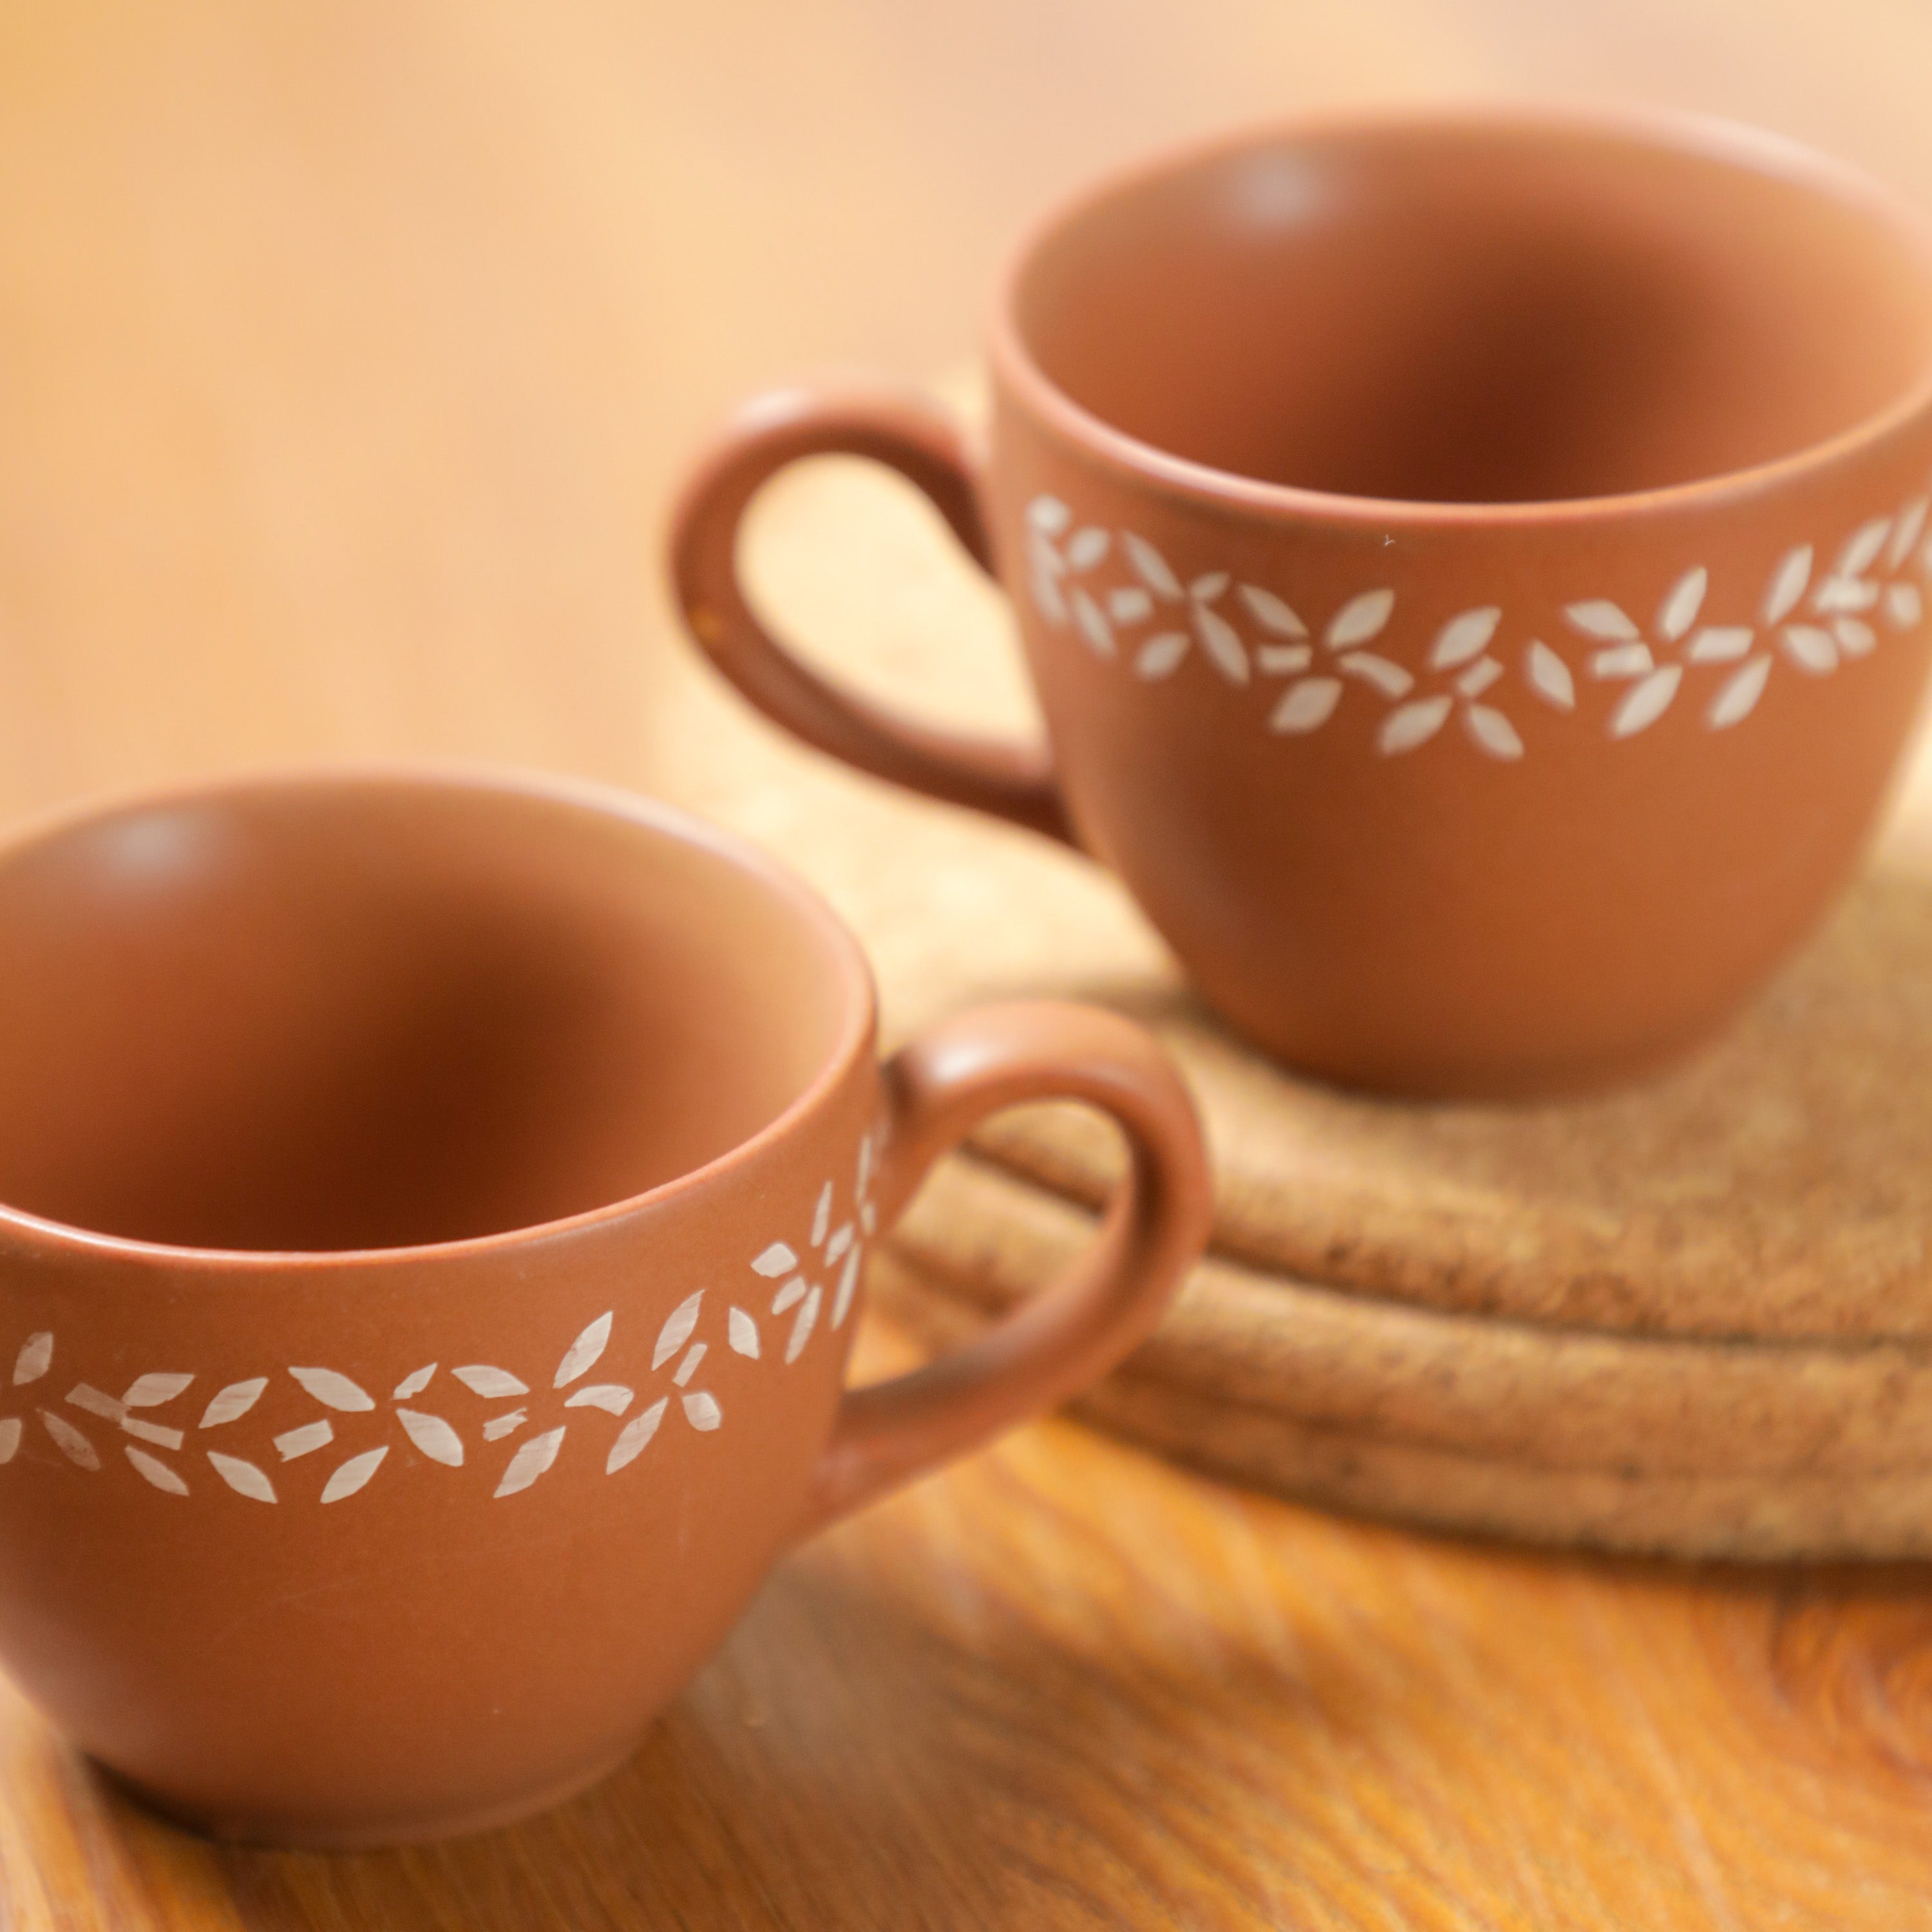 White Flower Printed Ceramic Tea Cup Set, For Home